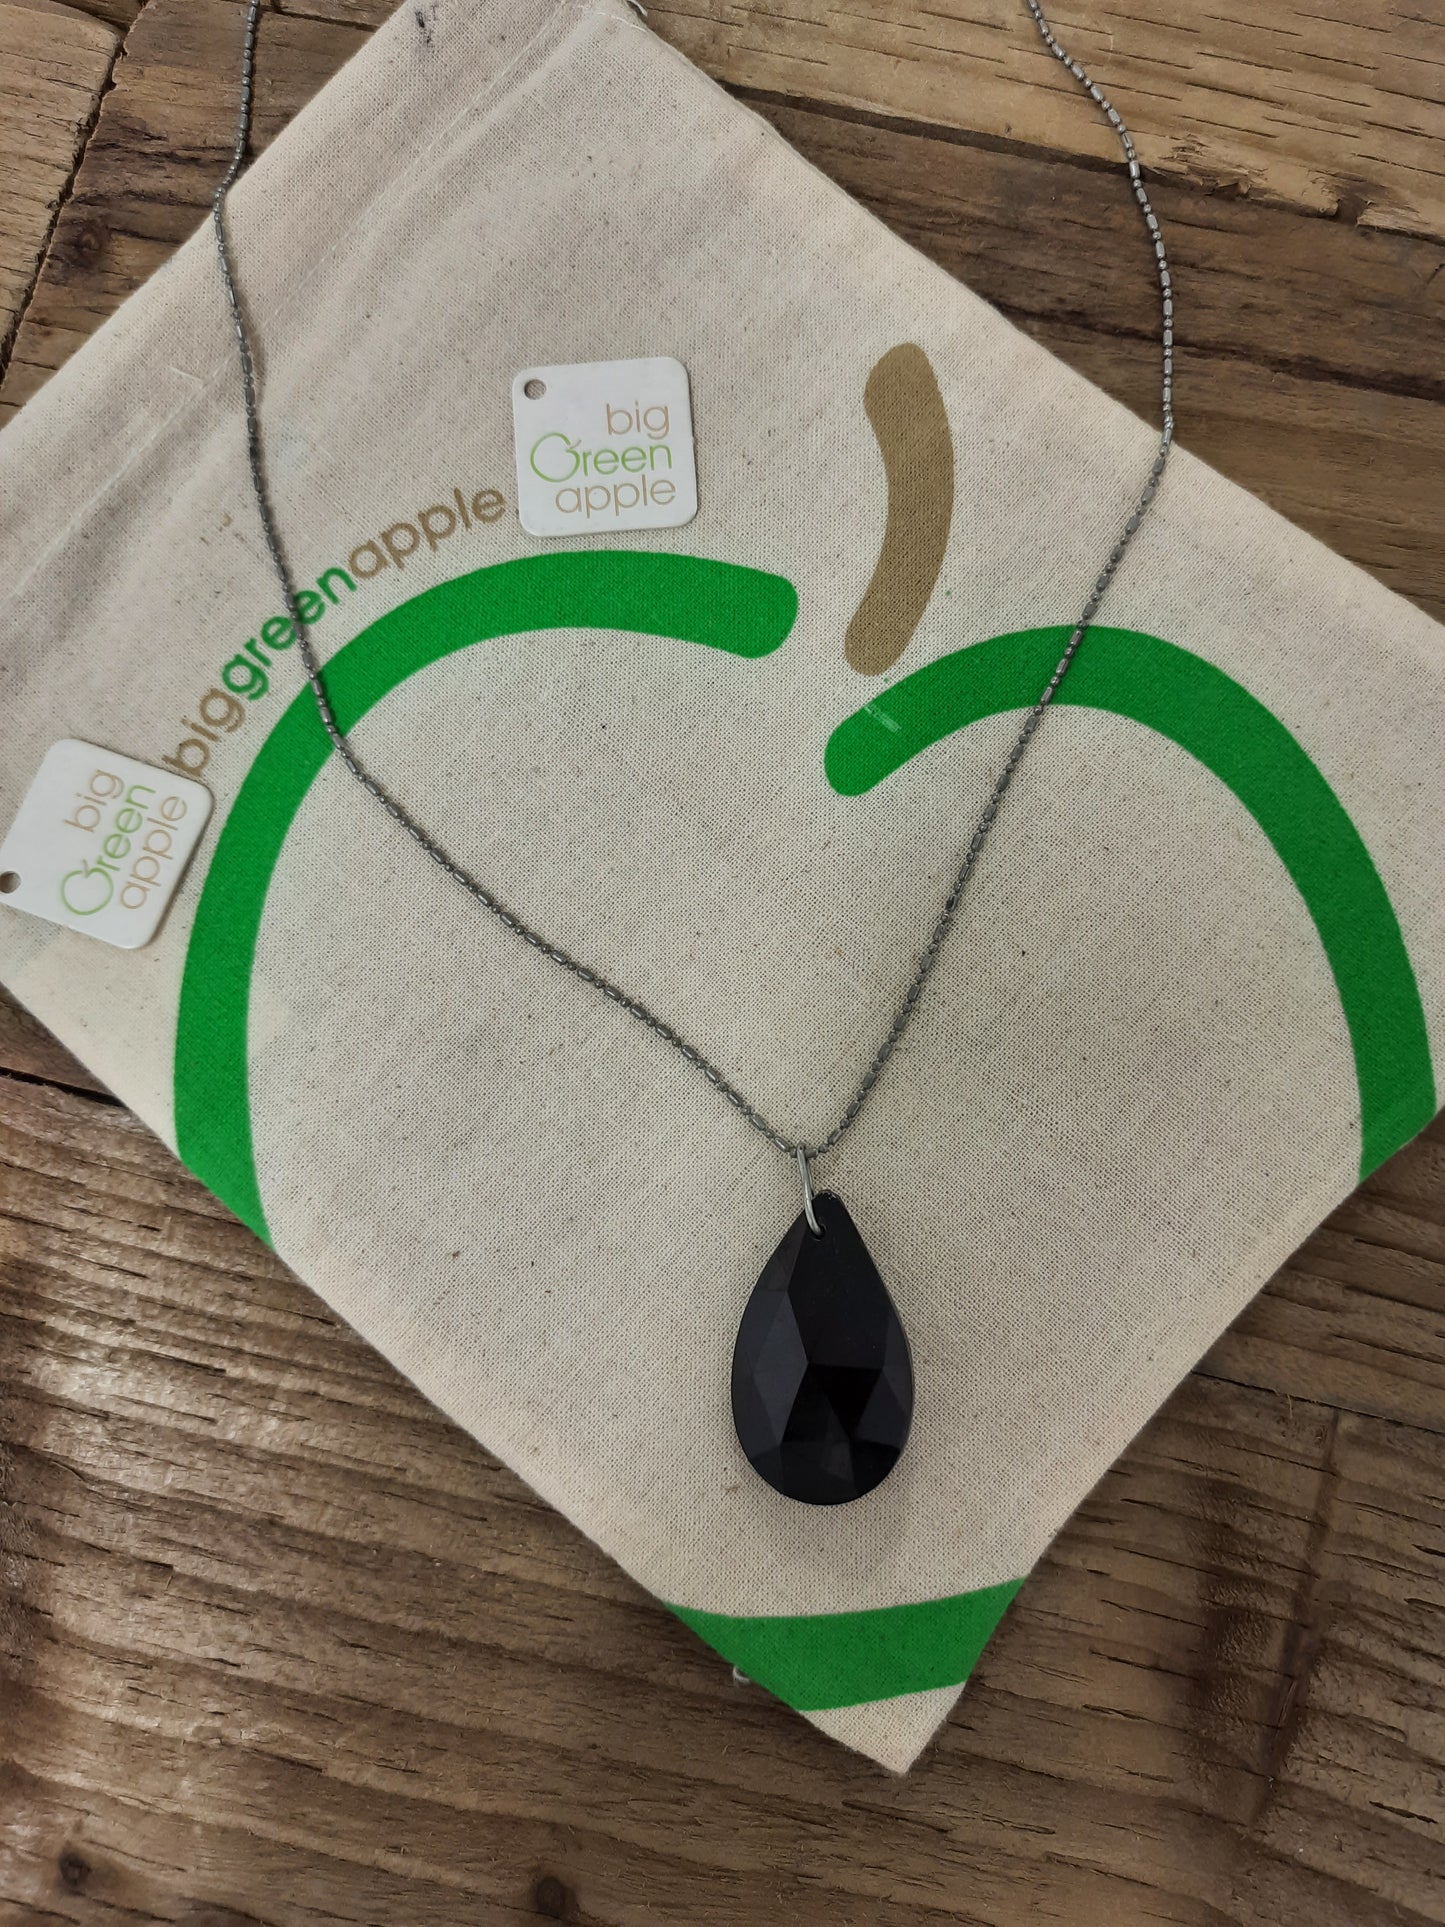 Eco Friendly Shop, Necklaces, Sustainable Living, Ethical Gifts, Gift Ideas, Jewellery, BIG GREEN APPLE 